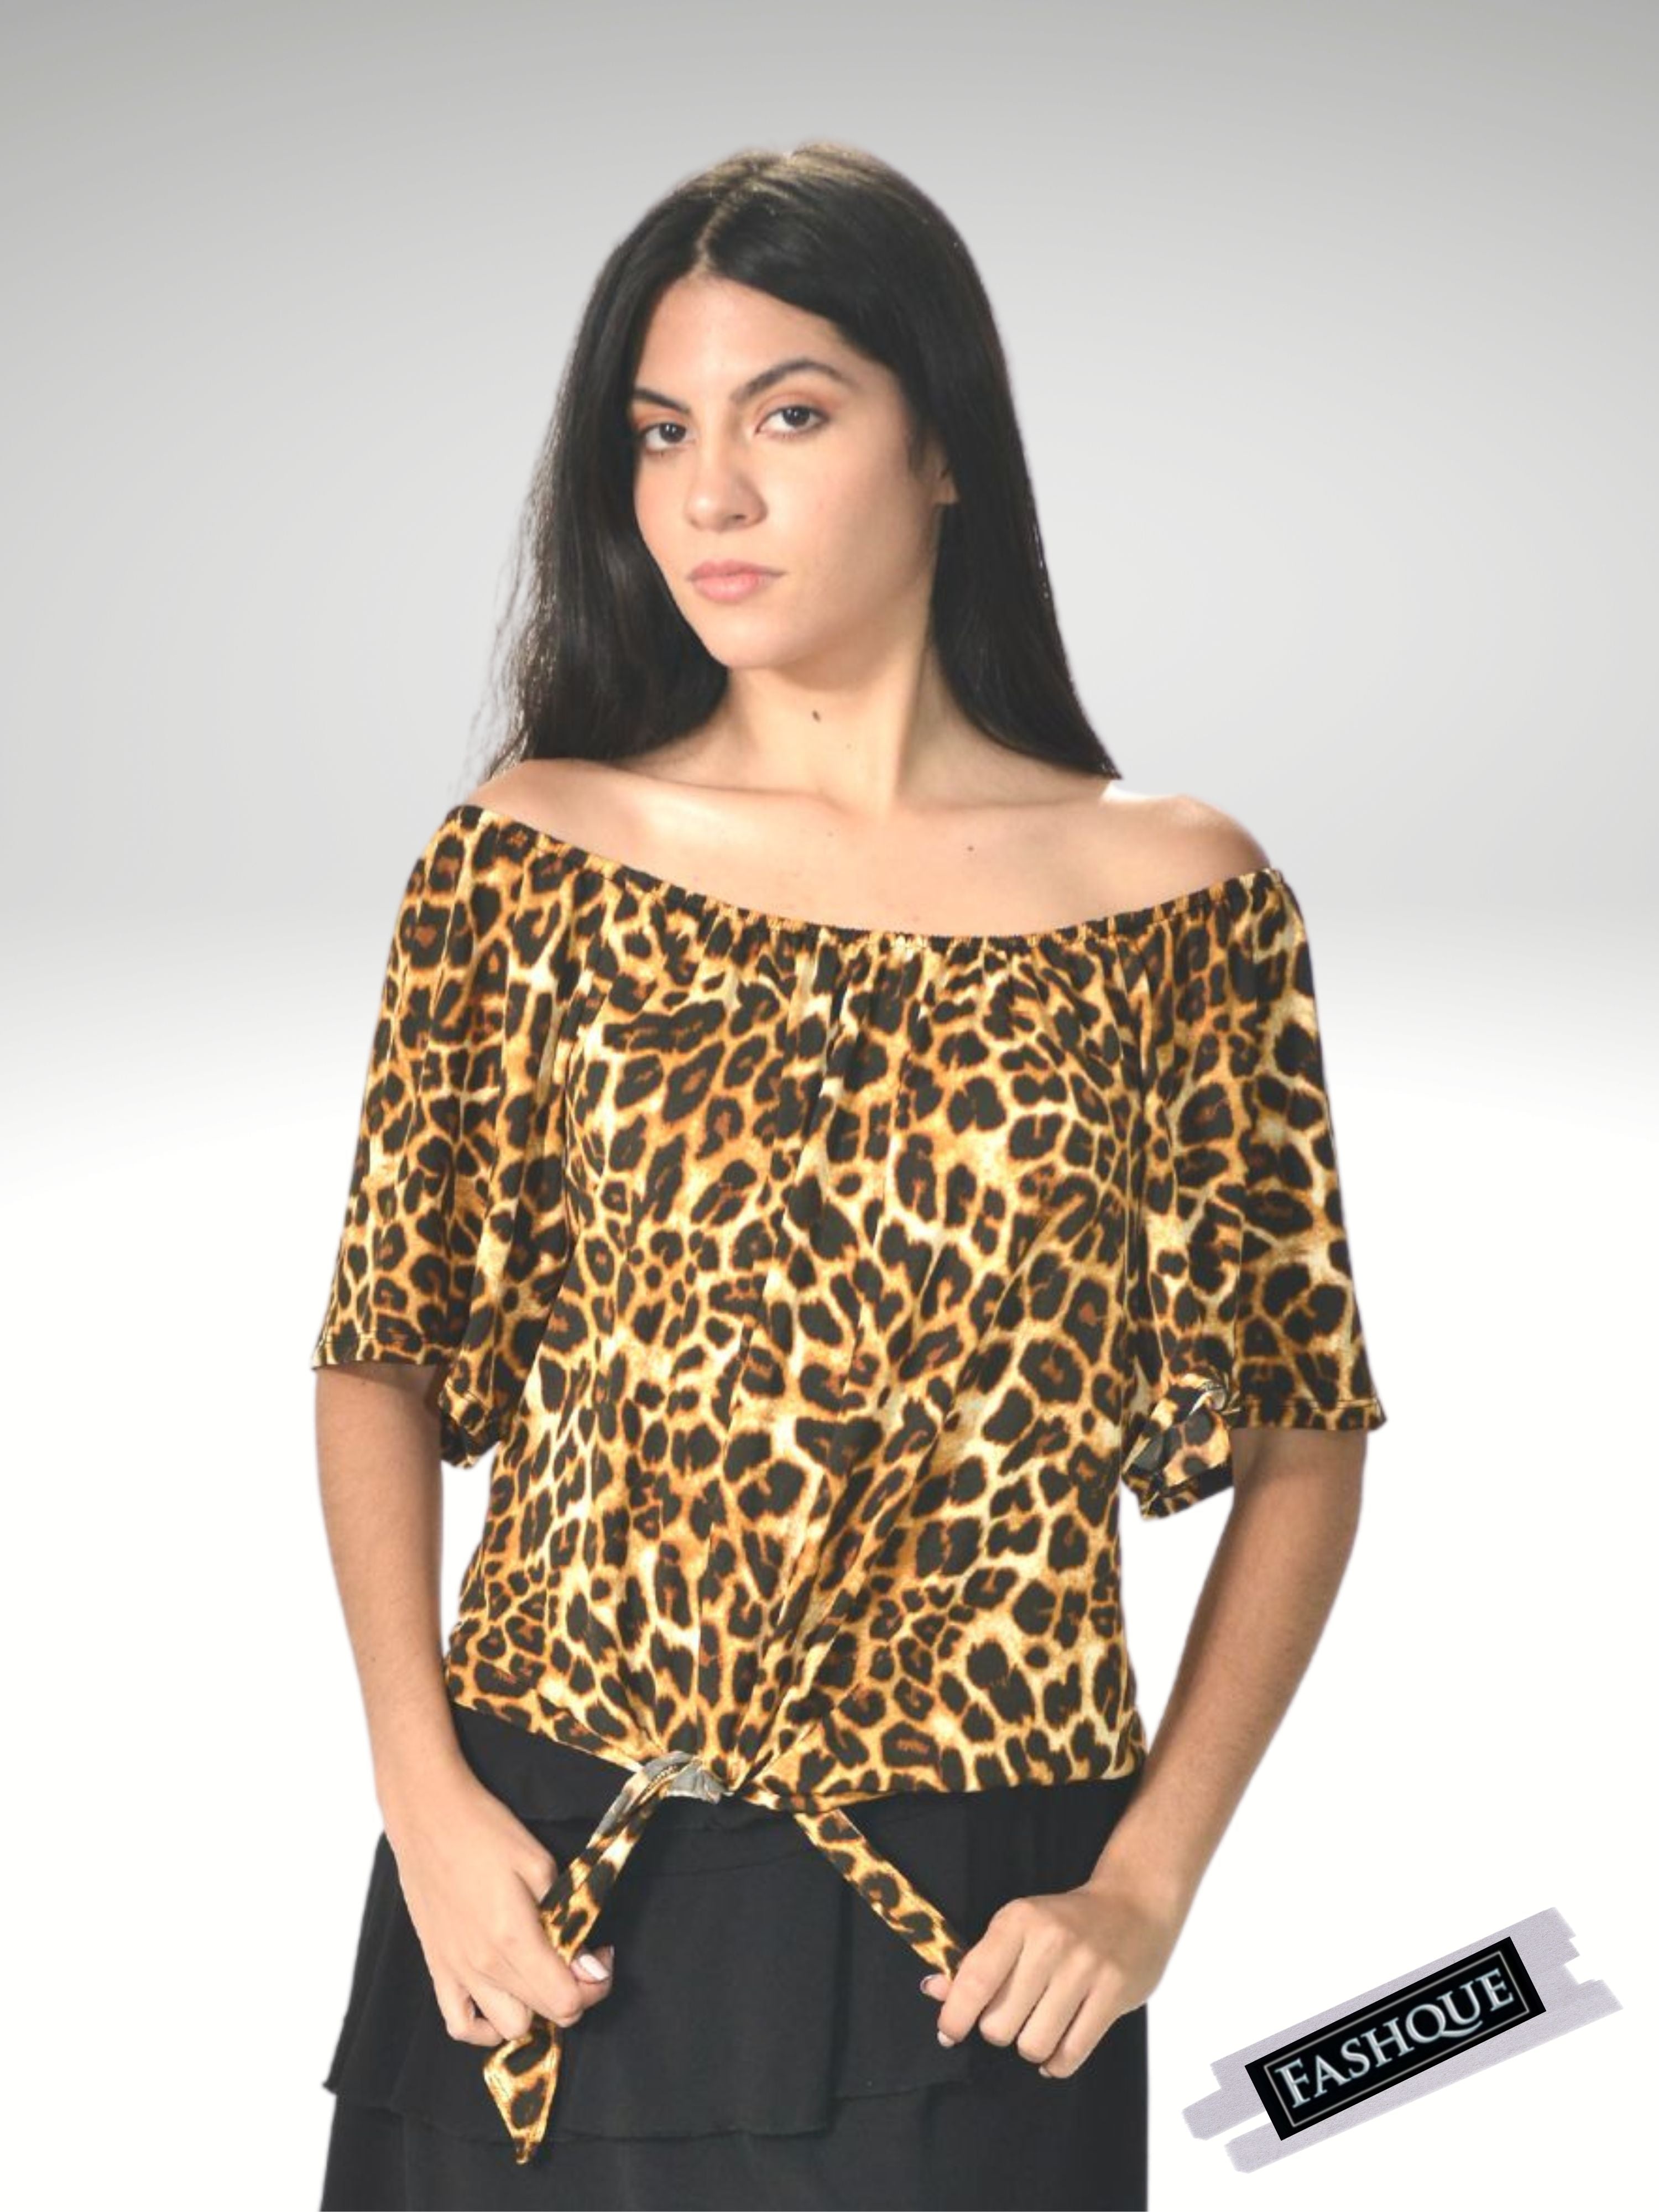 FASHQUE - Asymmetrical OFF Shoulder top with a knot detail - T509